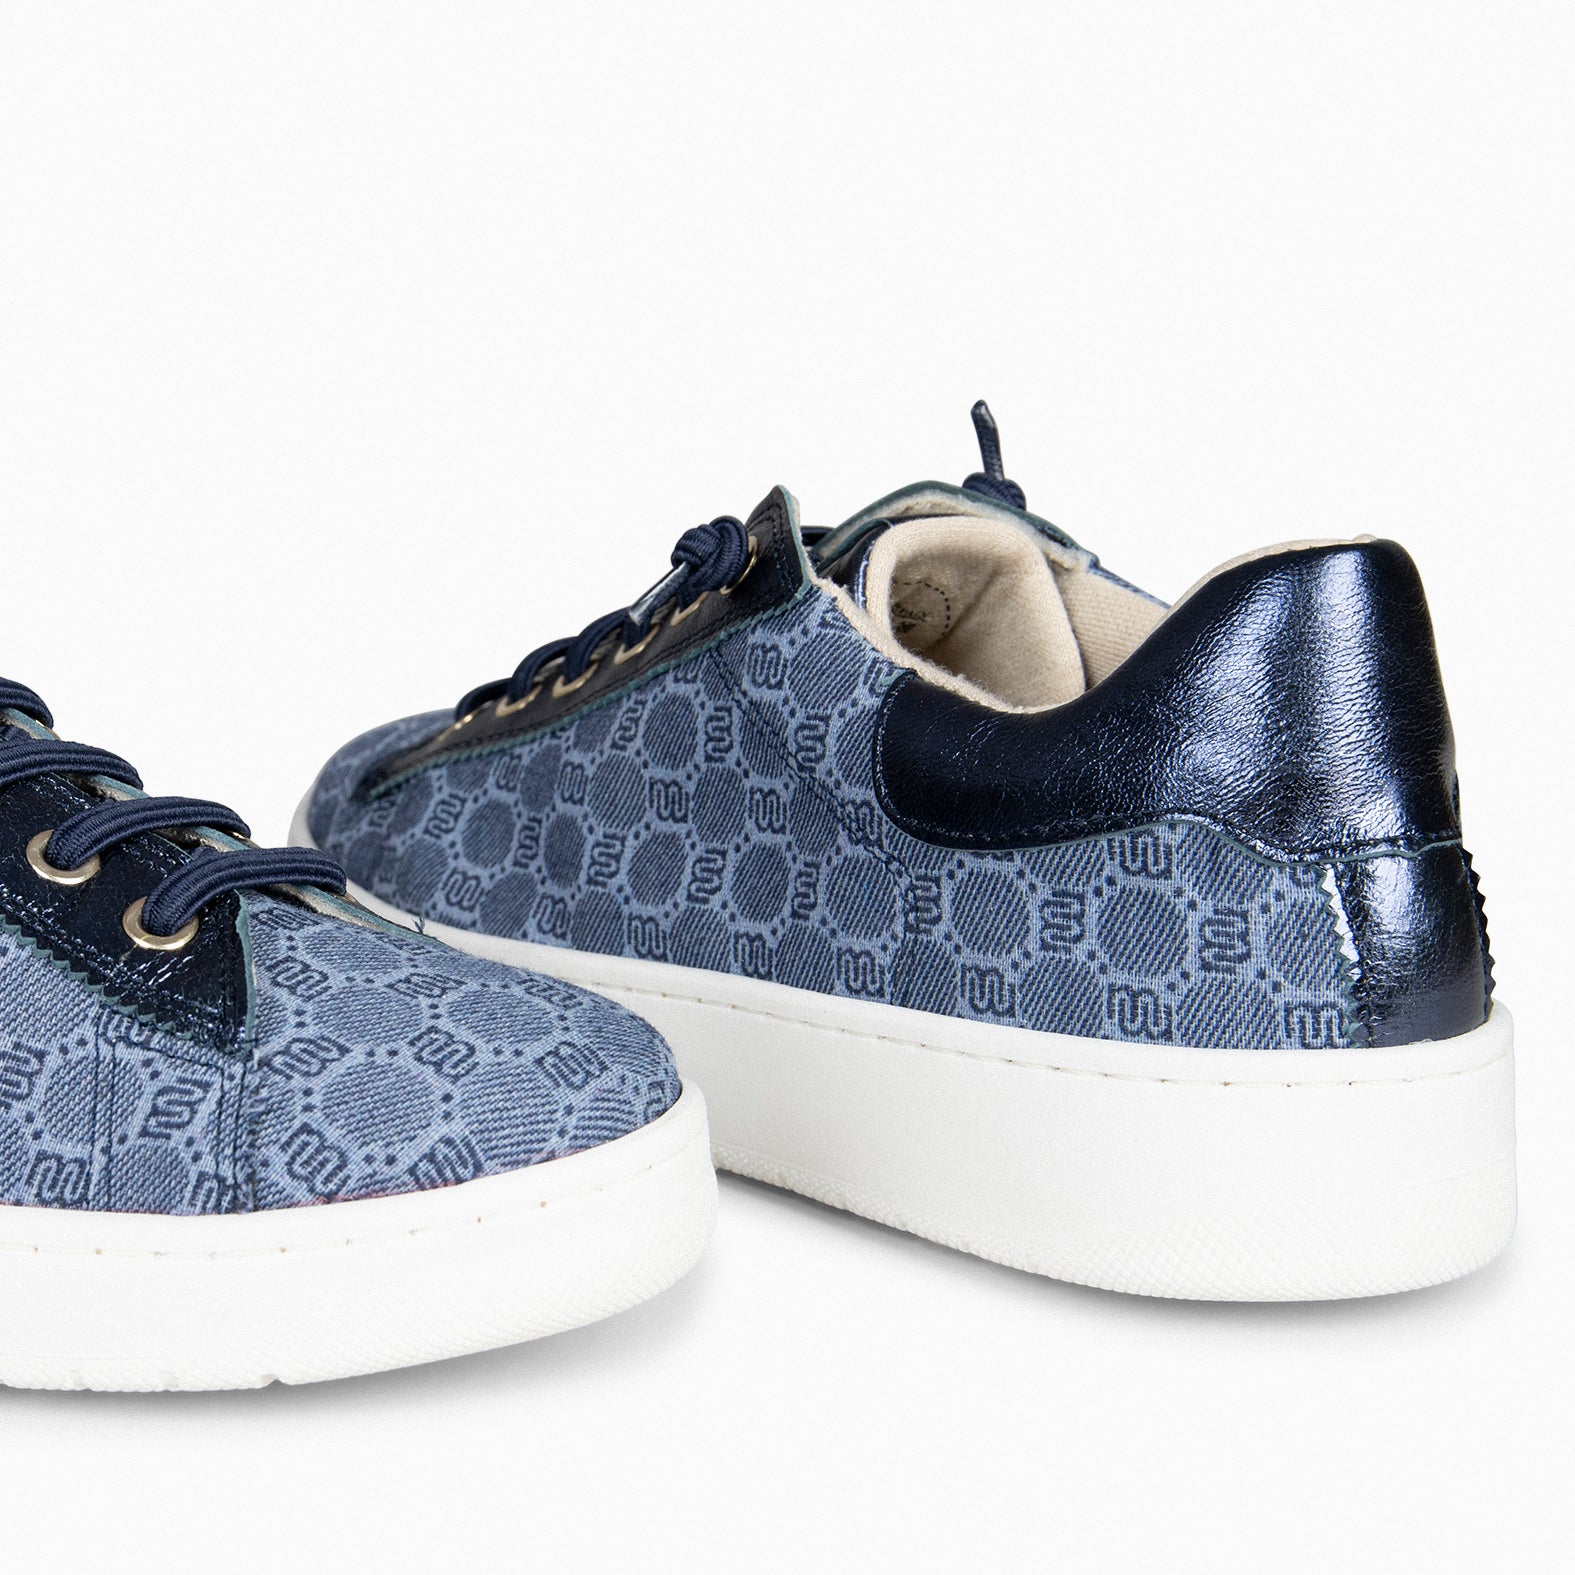 TOULOUSE - BLUE SNEAKERS WITH ELASTIC LACES